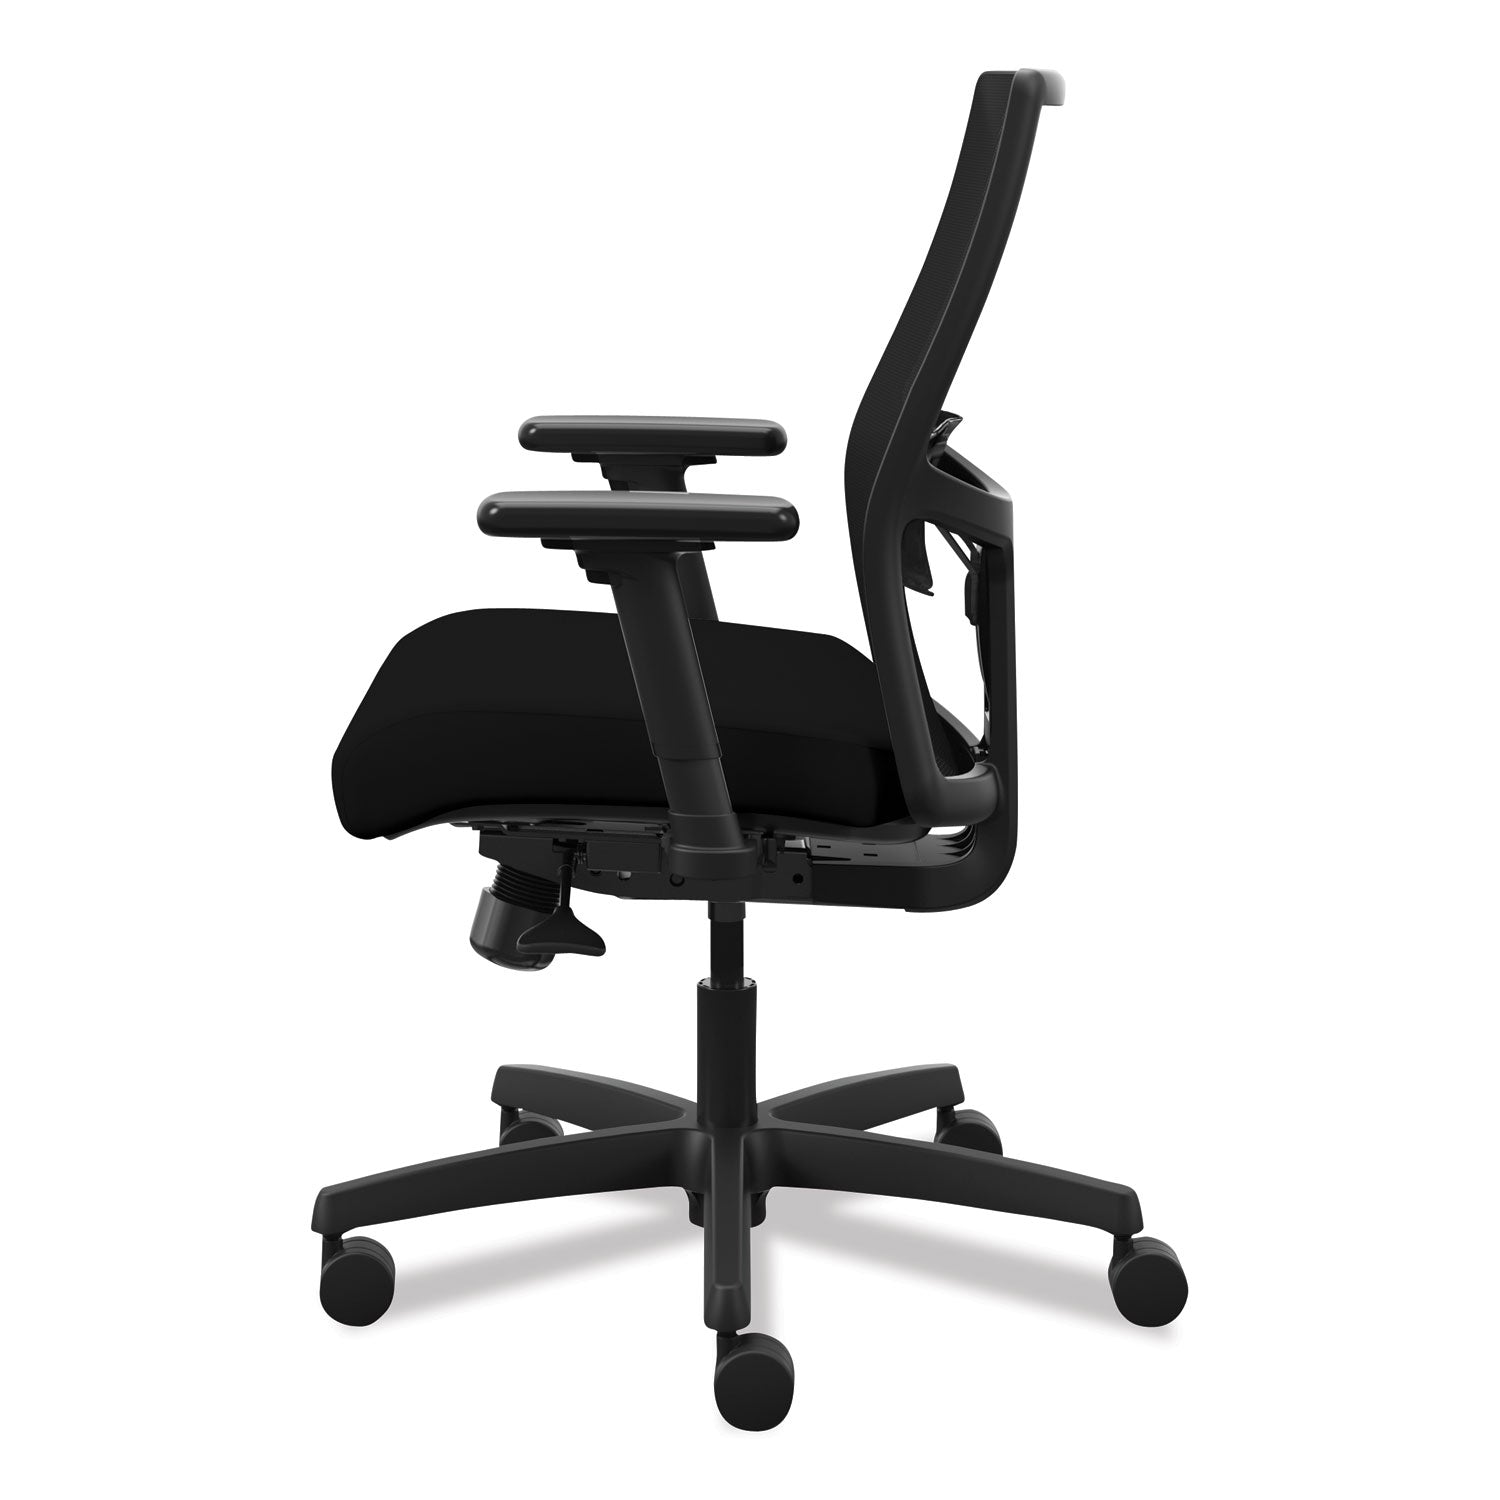 ignition-20-4-way-stretch-low-back-mesh-task-chair-supports-up-to-300-lb-1675-to-2125-seat-height-black_honitlmk1mc10b - 4